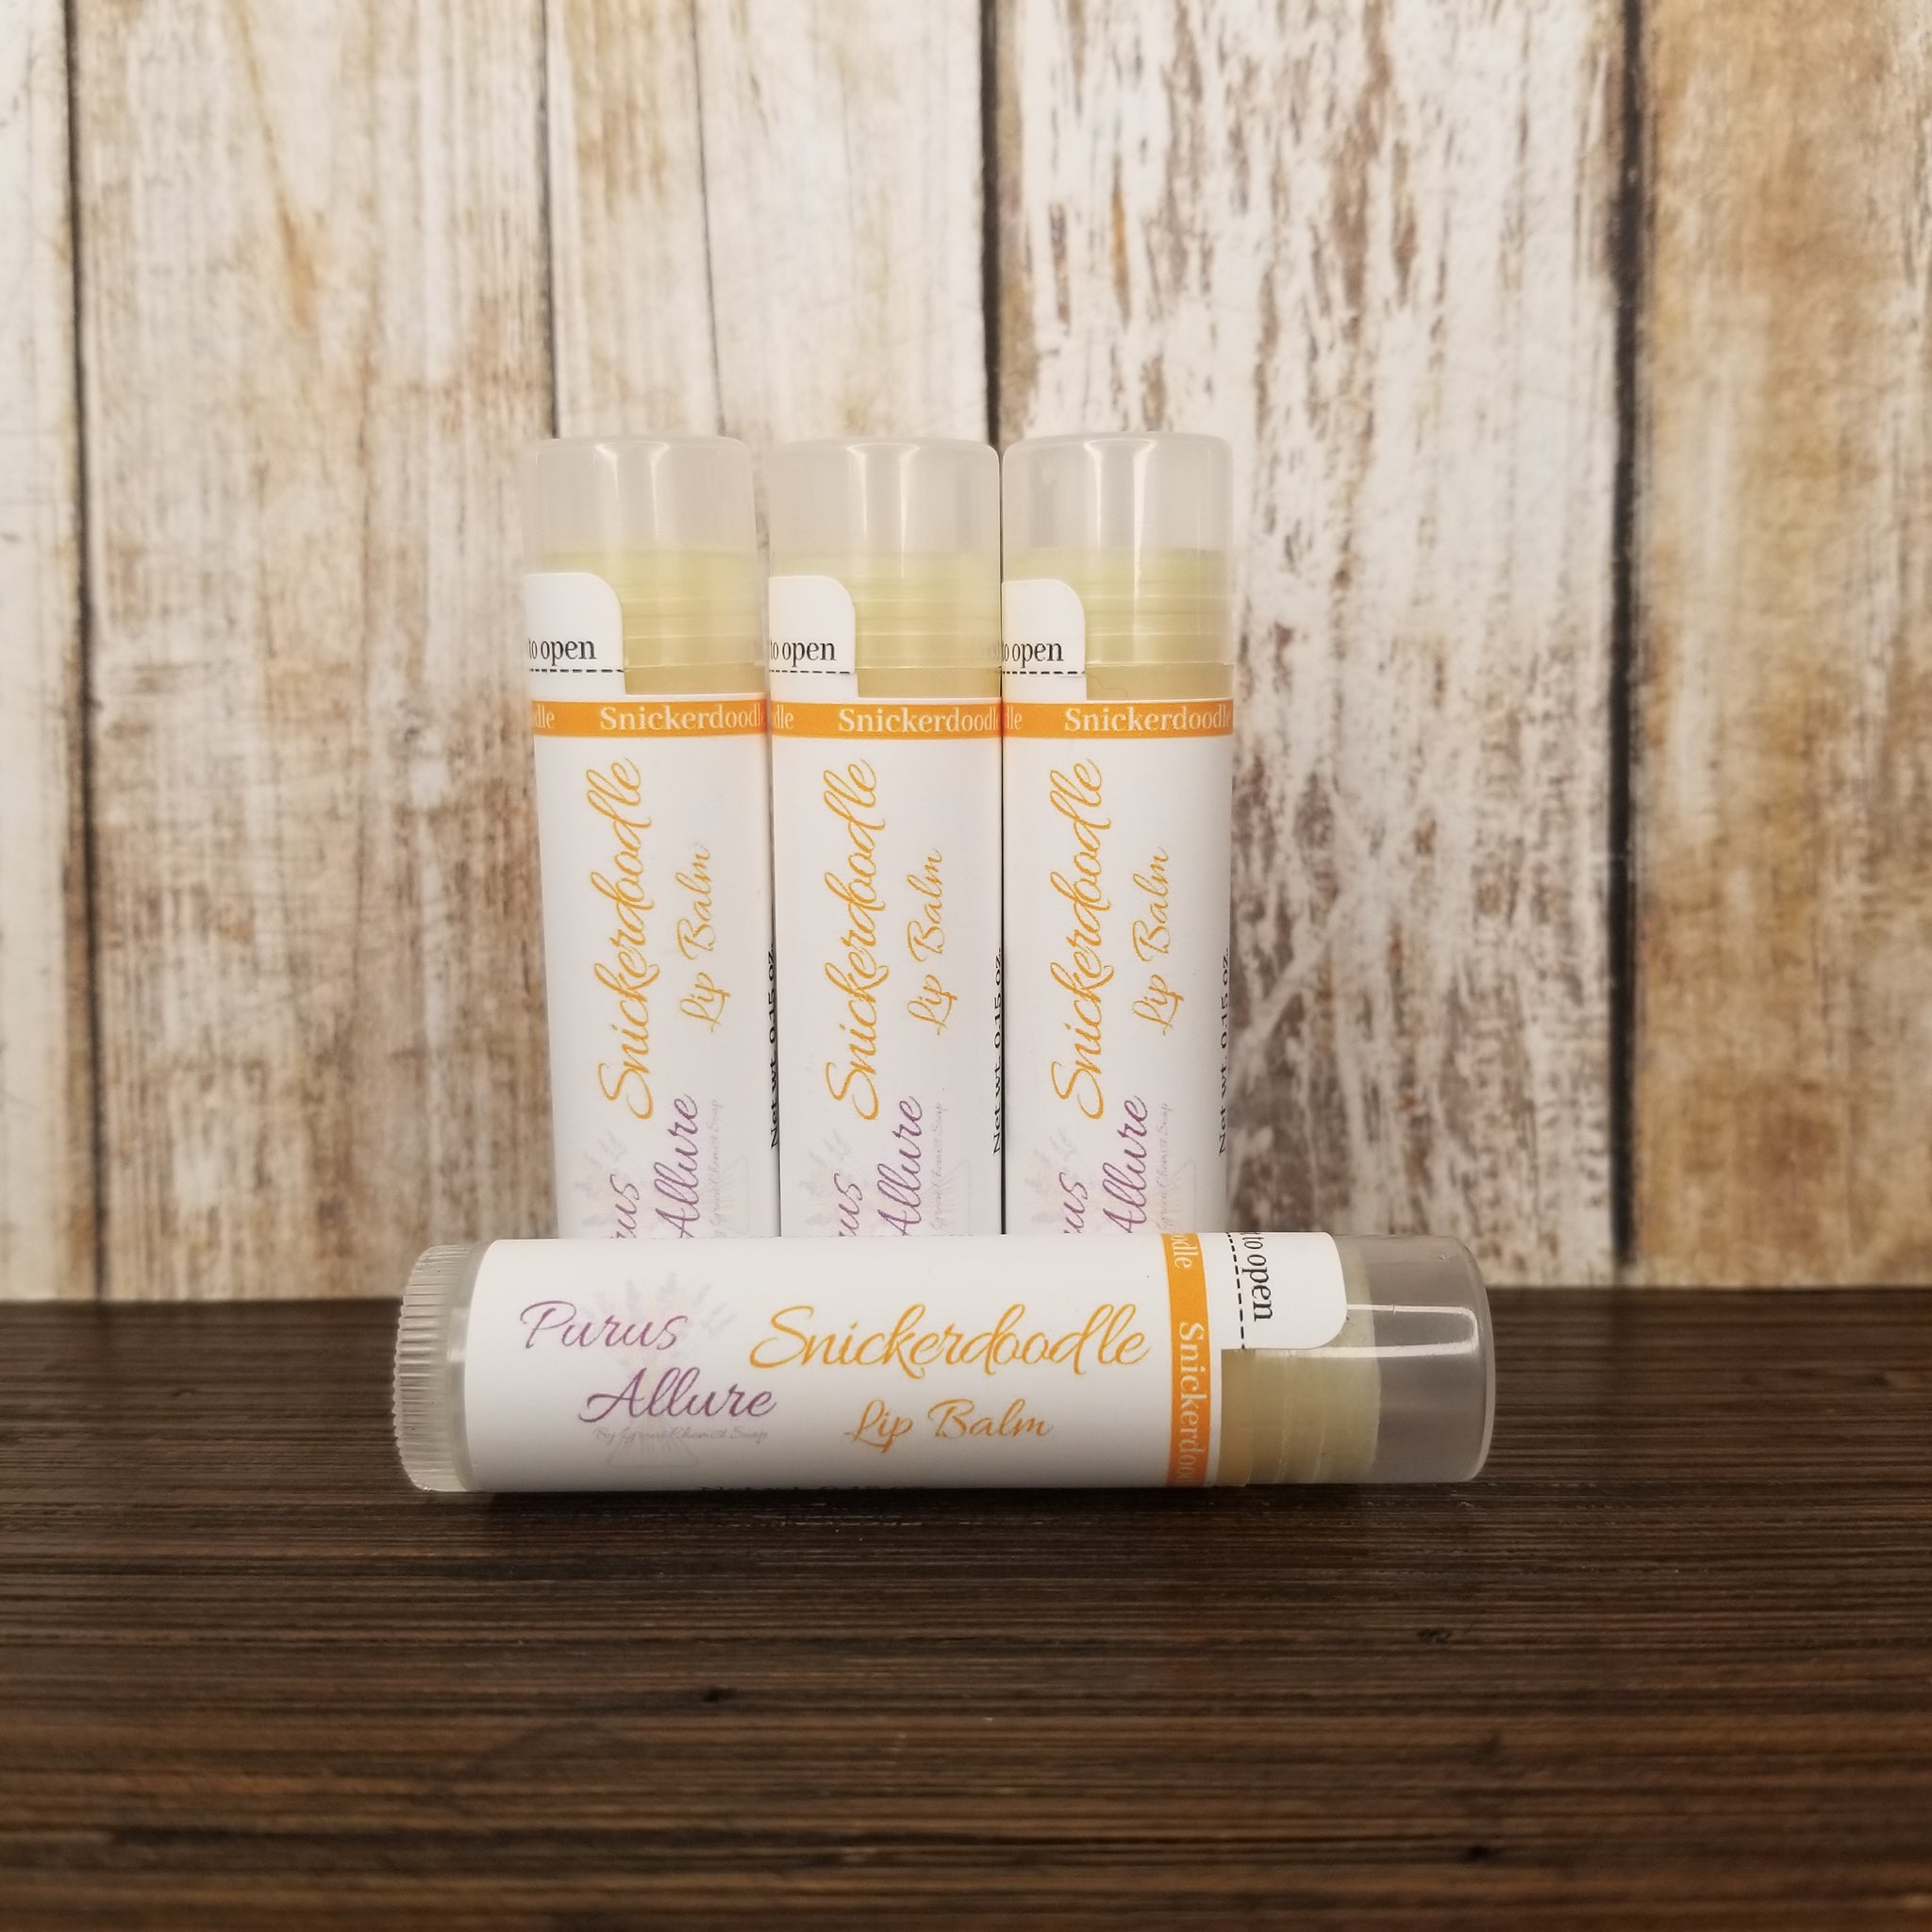 Beeswax Lip Balm with Shea Butter and Lanolin - 0.15oz - Multiple Varieties